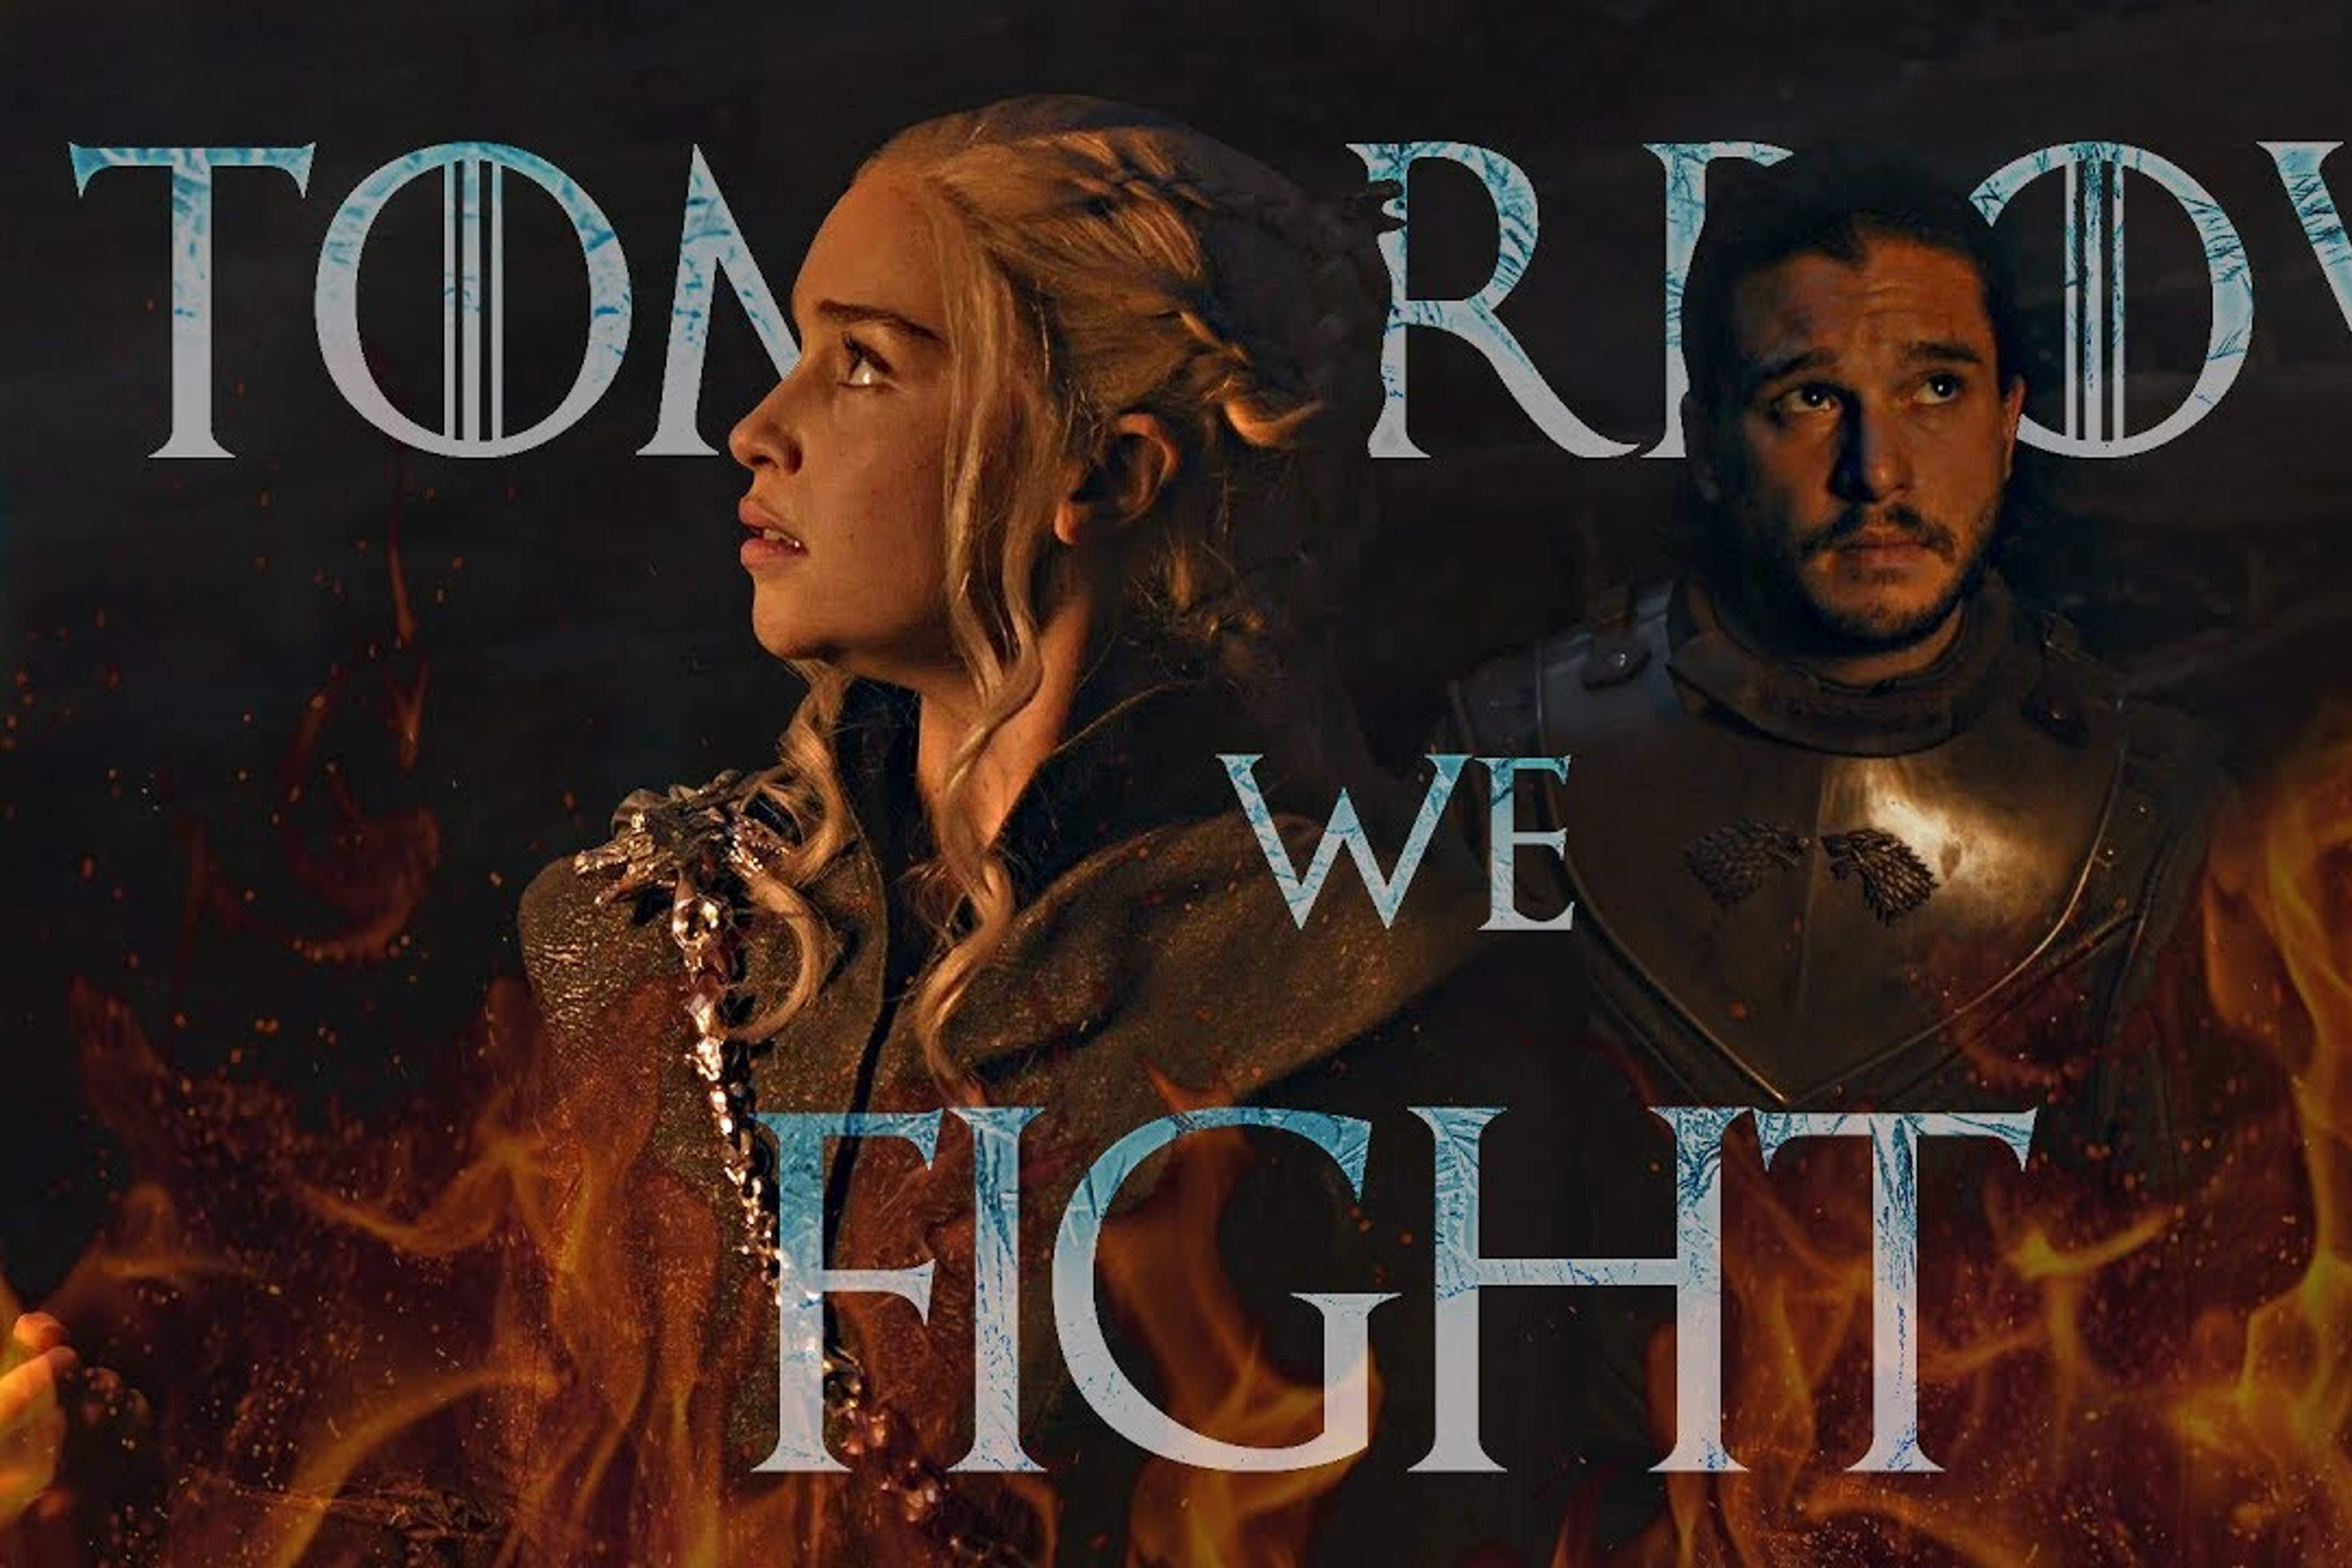 Game of Thrones styled text saying "Tomorrow We Fight"